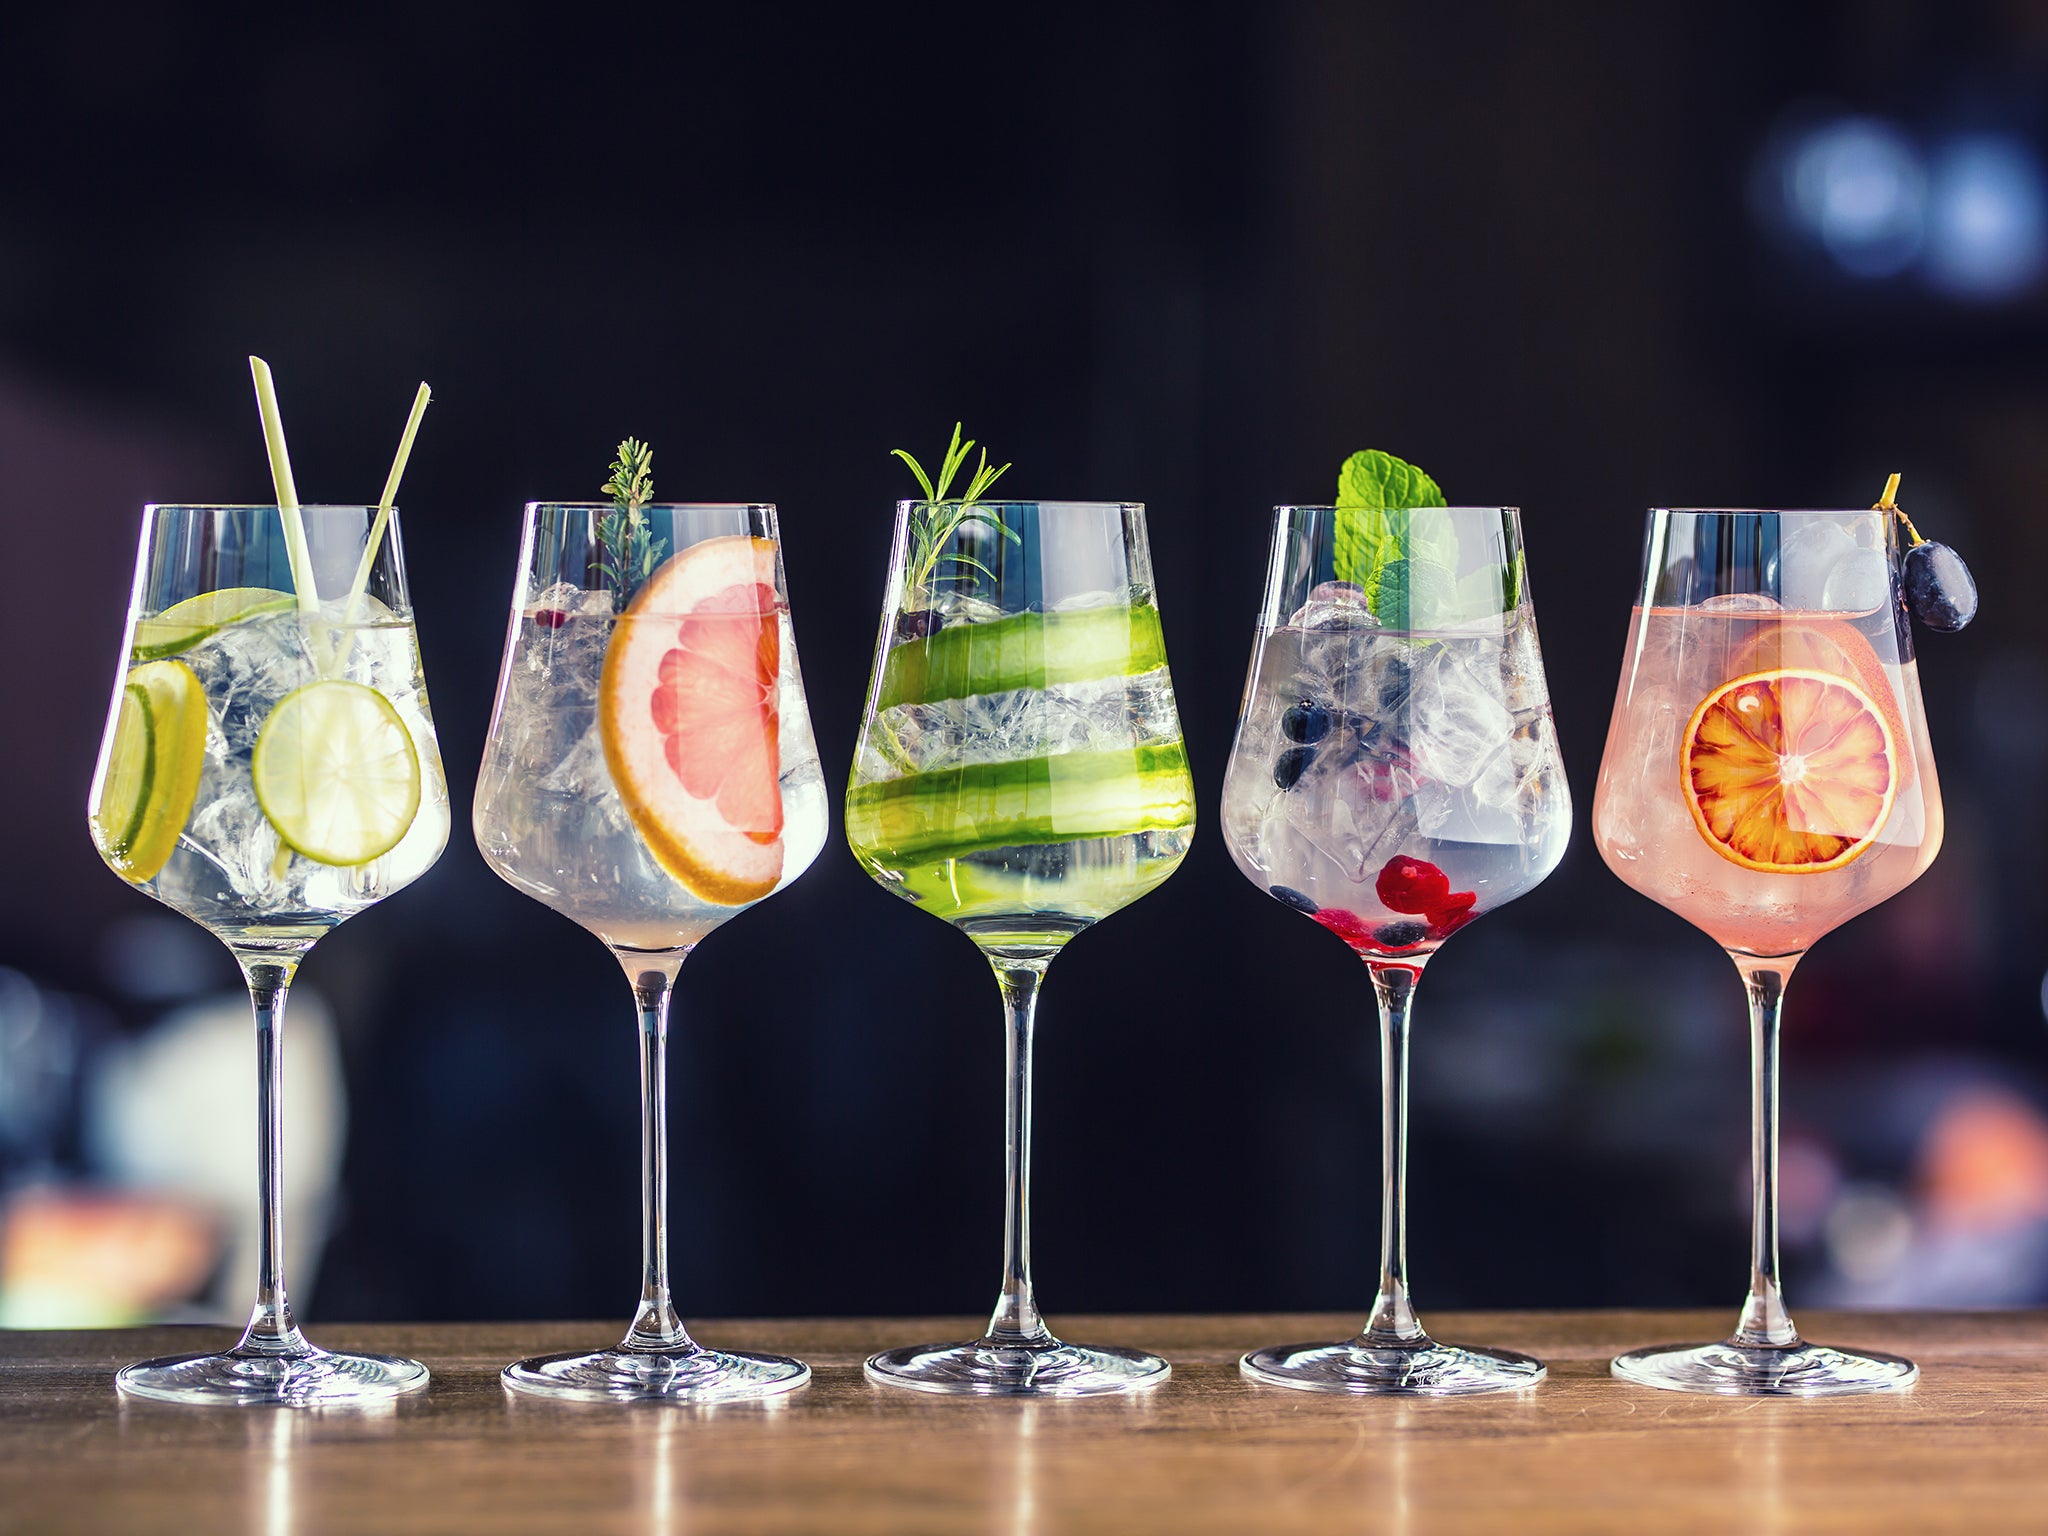 Mojitos, margaritas, and martinis are among the most popular drinks